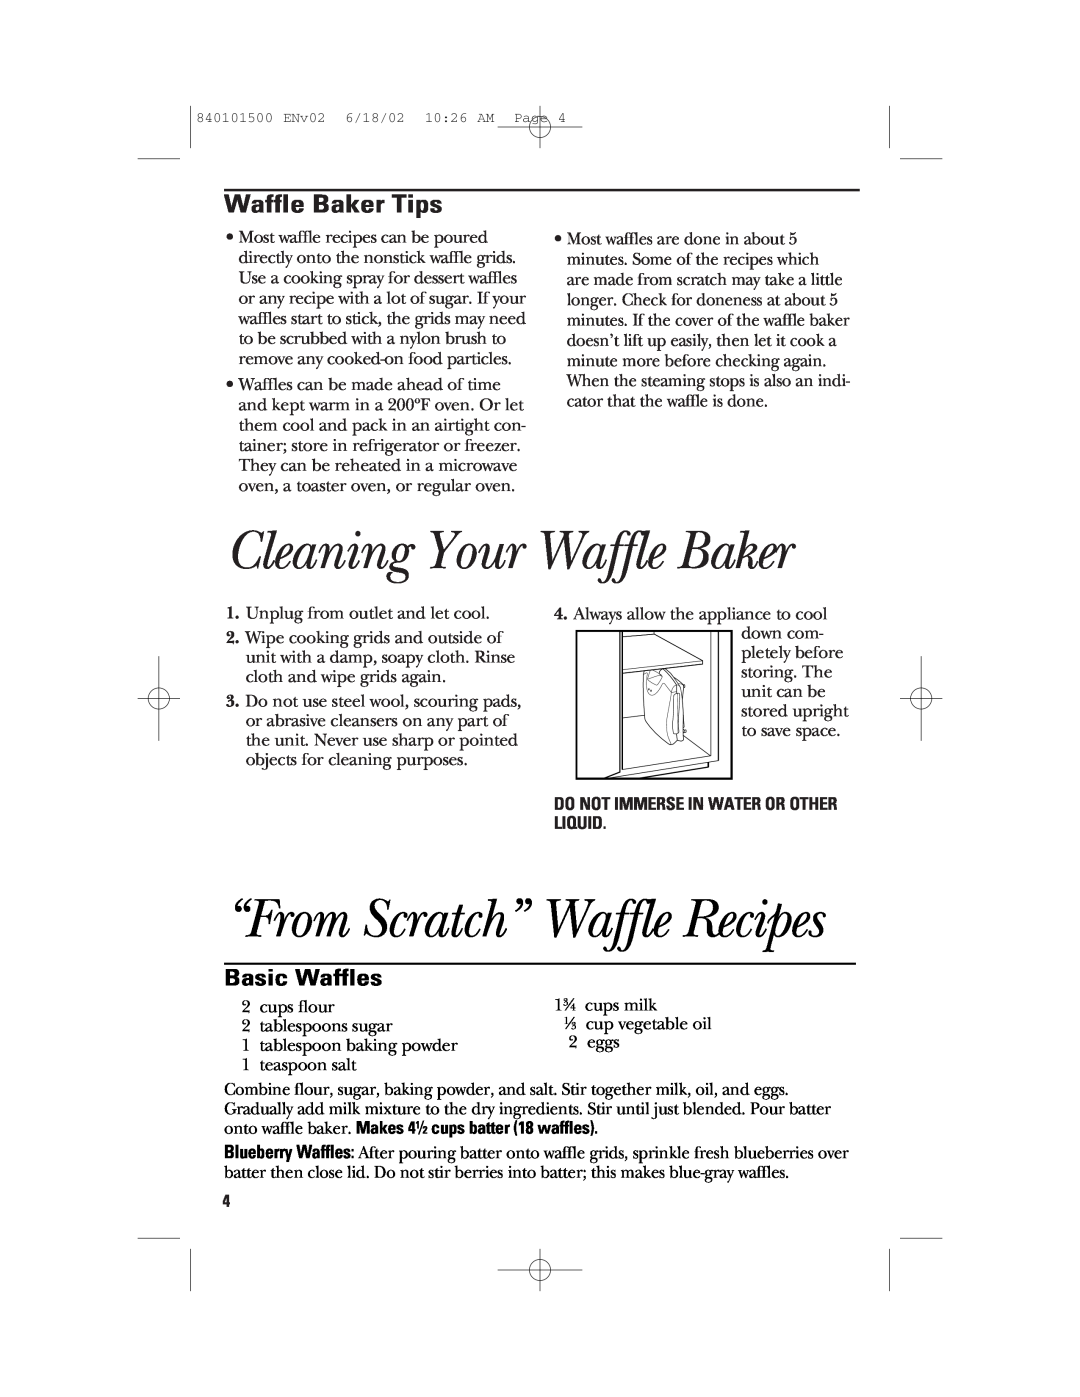 GE 840101500 manual Cleaning Your Waffle Baker, “From Scratch” Waffle Recipes, Waffle Baker Tips, Basic Waffles 